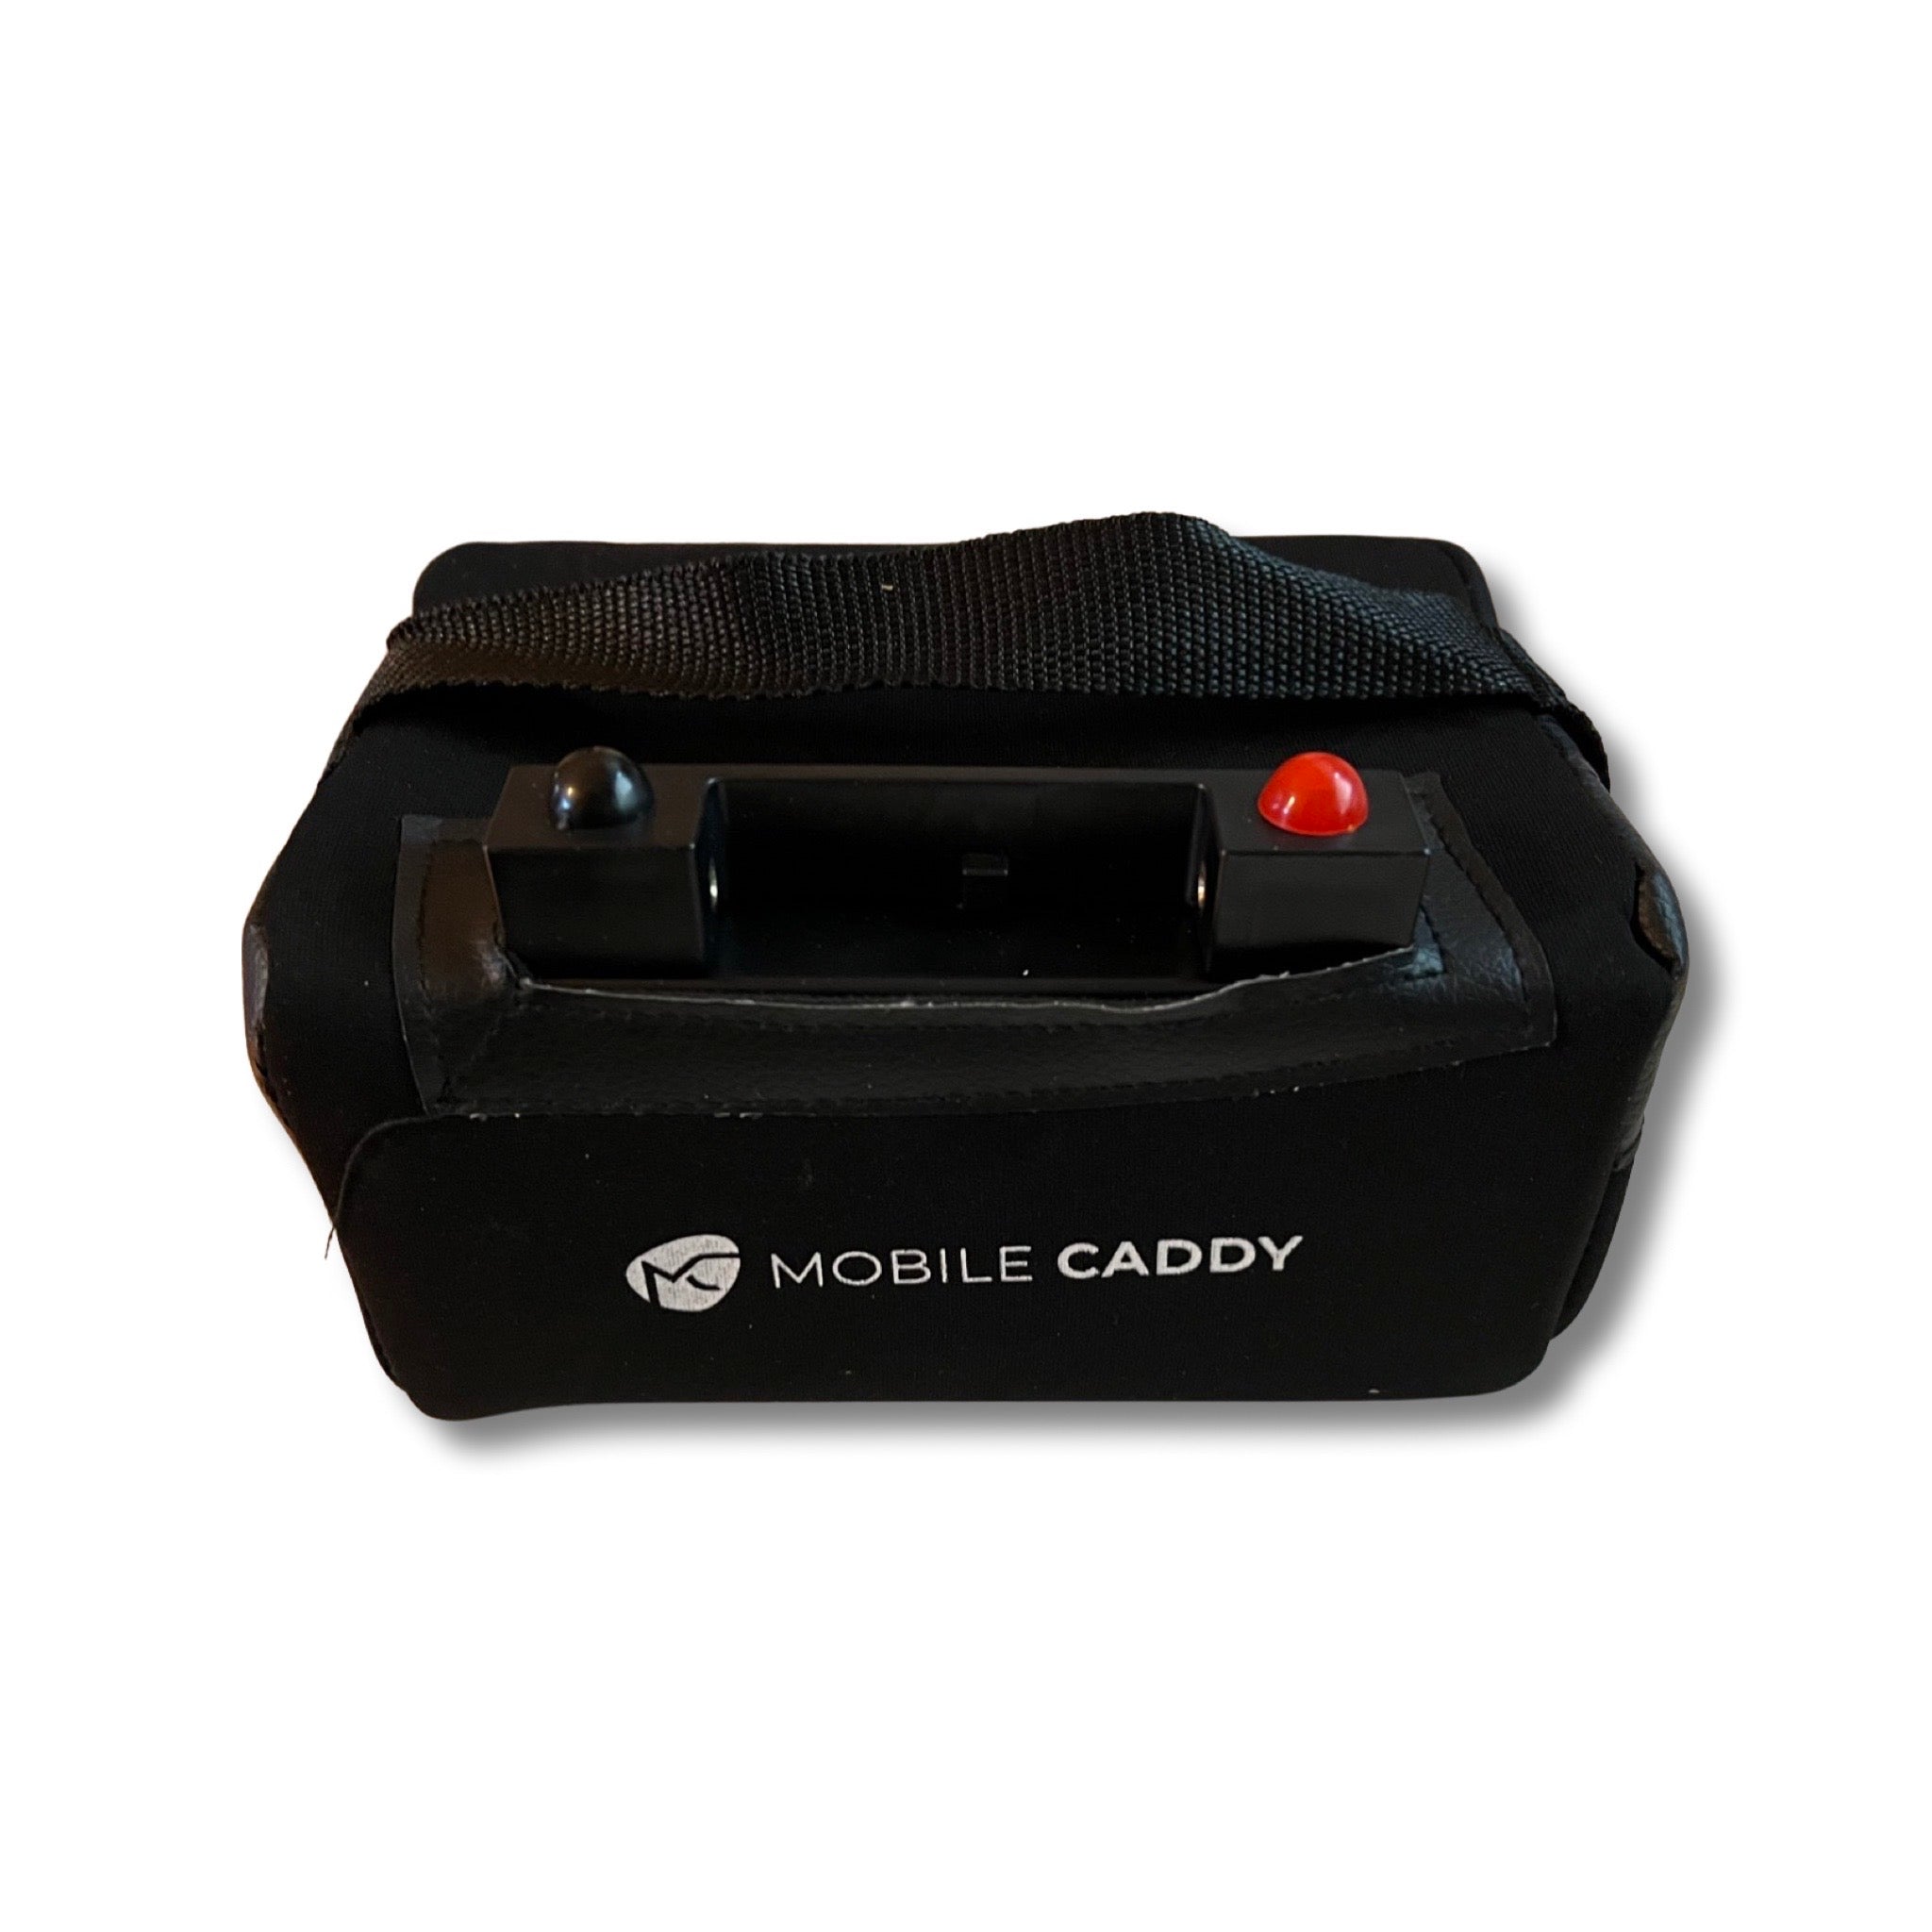 Lithium Battery for MobileCaddy GT series golf trolley